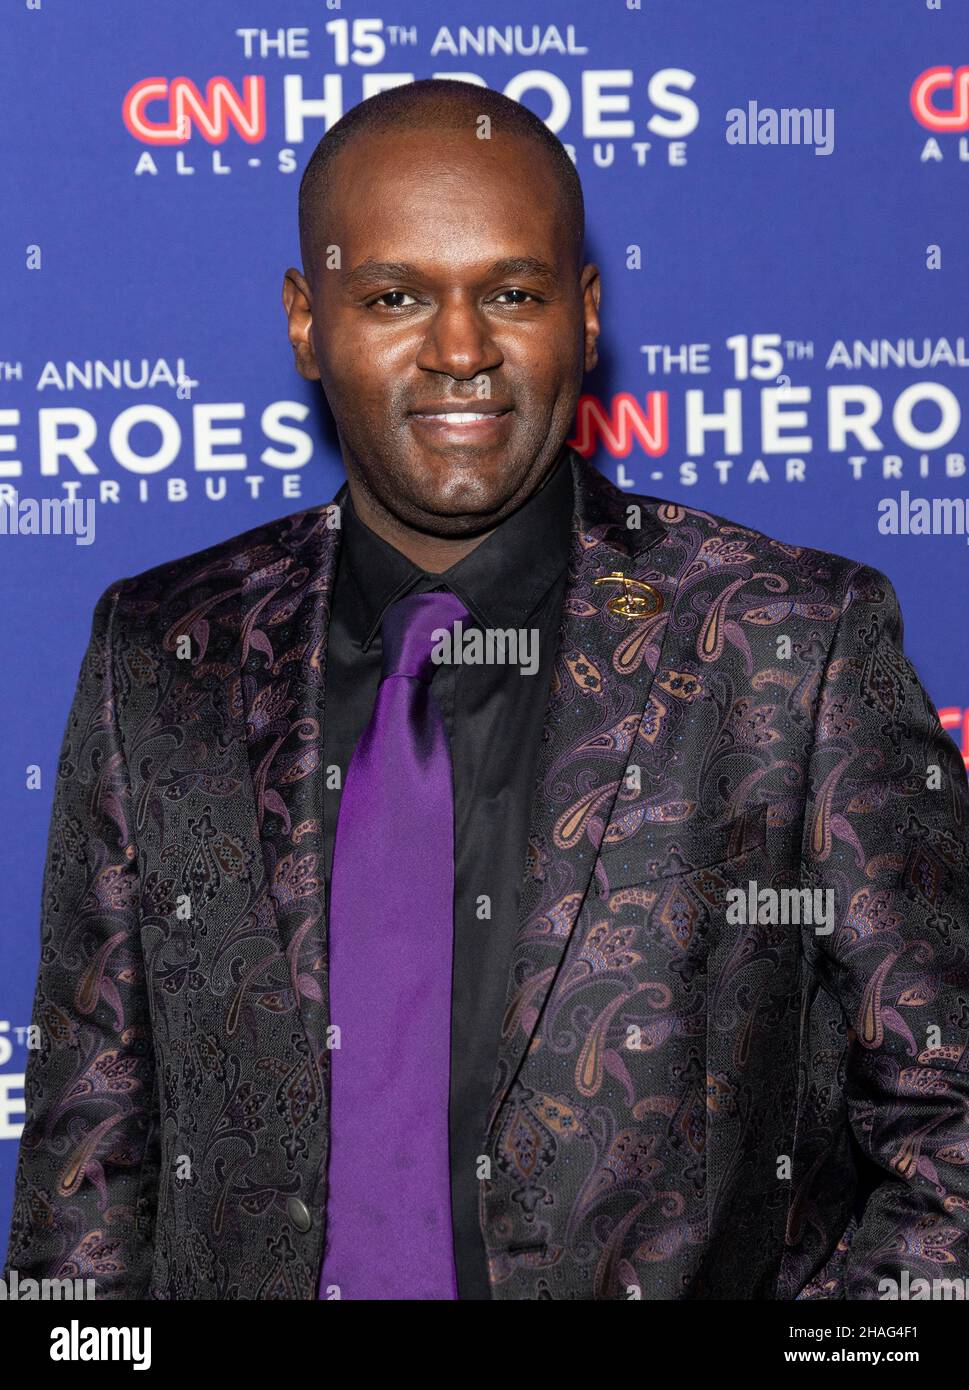 New York, NY - December 12, 2021: Harold O'Neal attends 15th Annual CNN Heroes All-Star Tribute at American Museum of Natural History Stock Photo